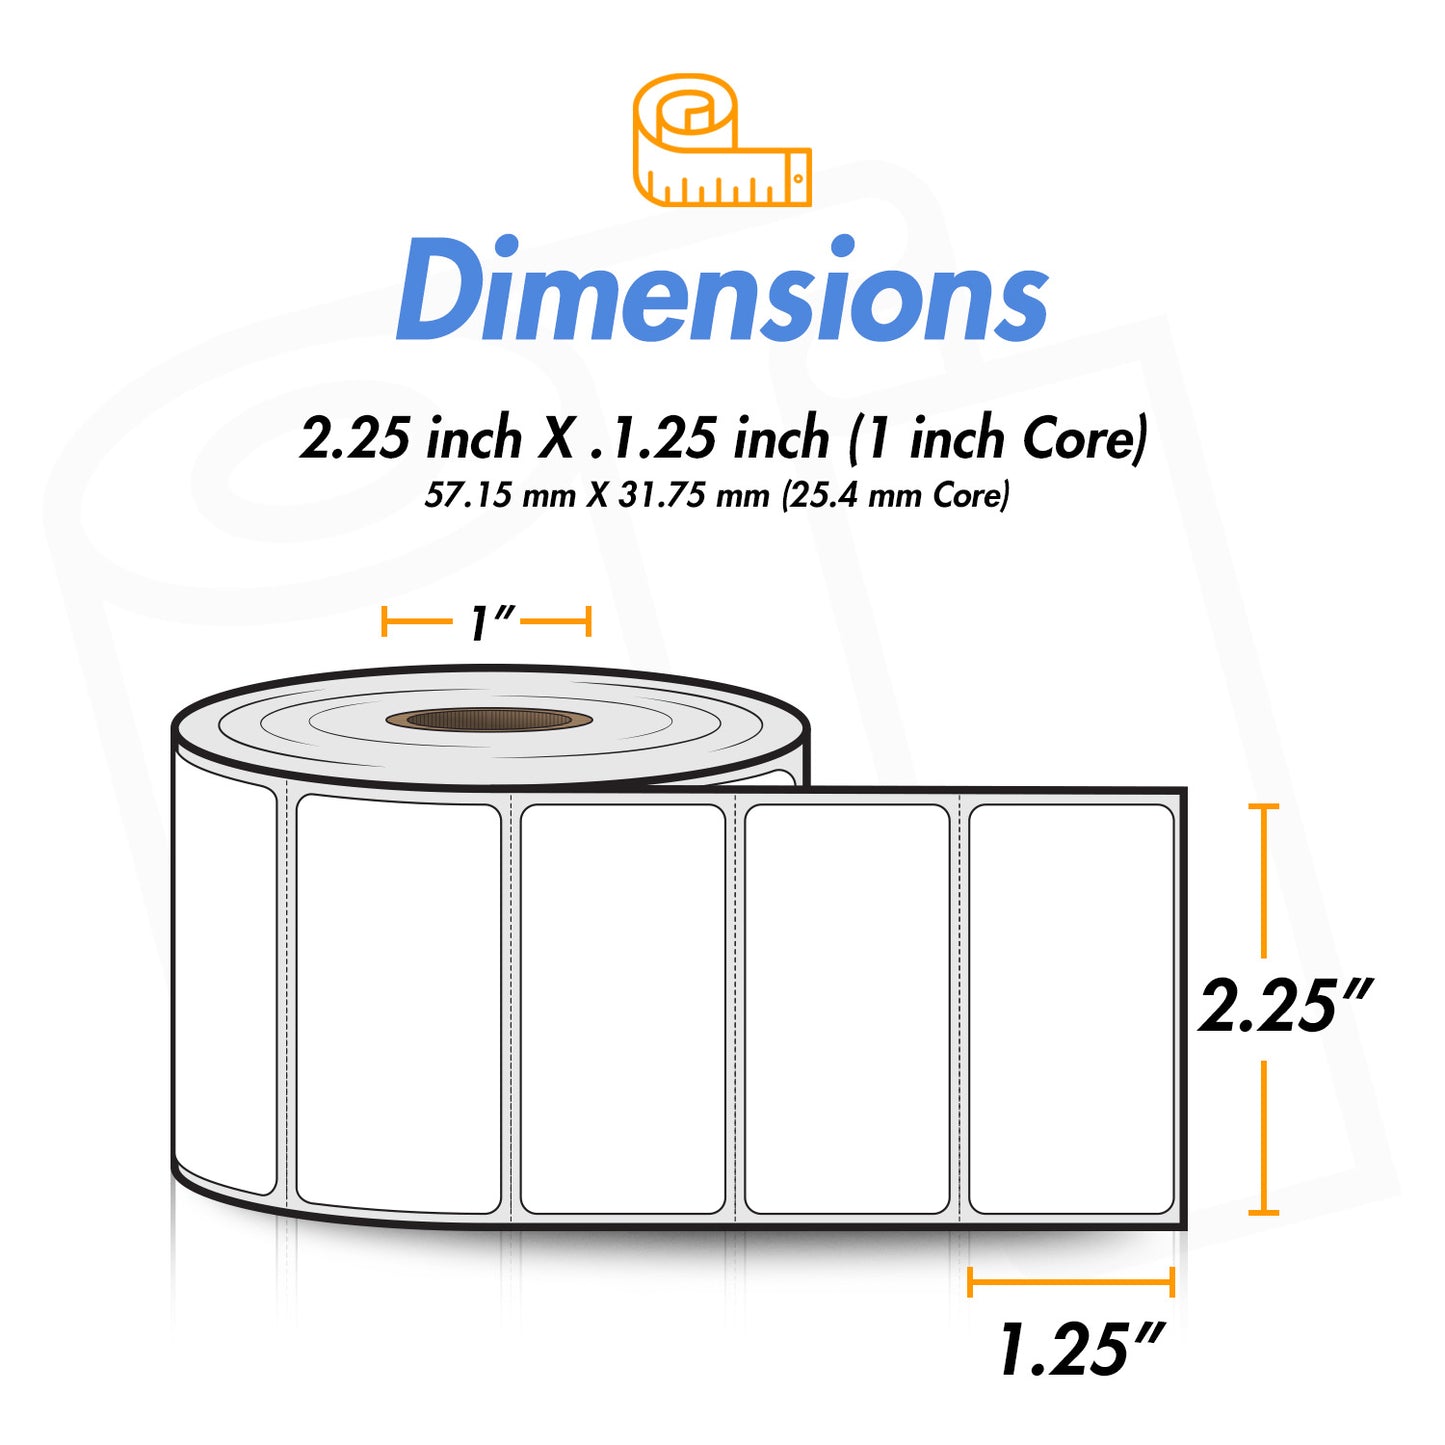 2.25 x 1.25 inch | Blank Direct Thermal Labels (1 inch Core)